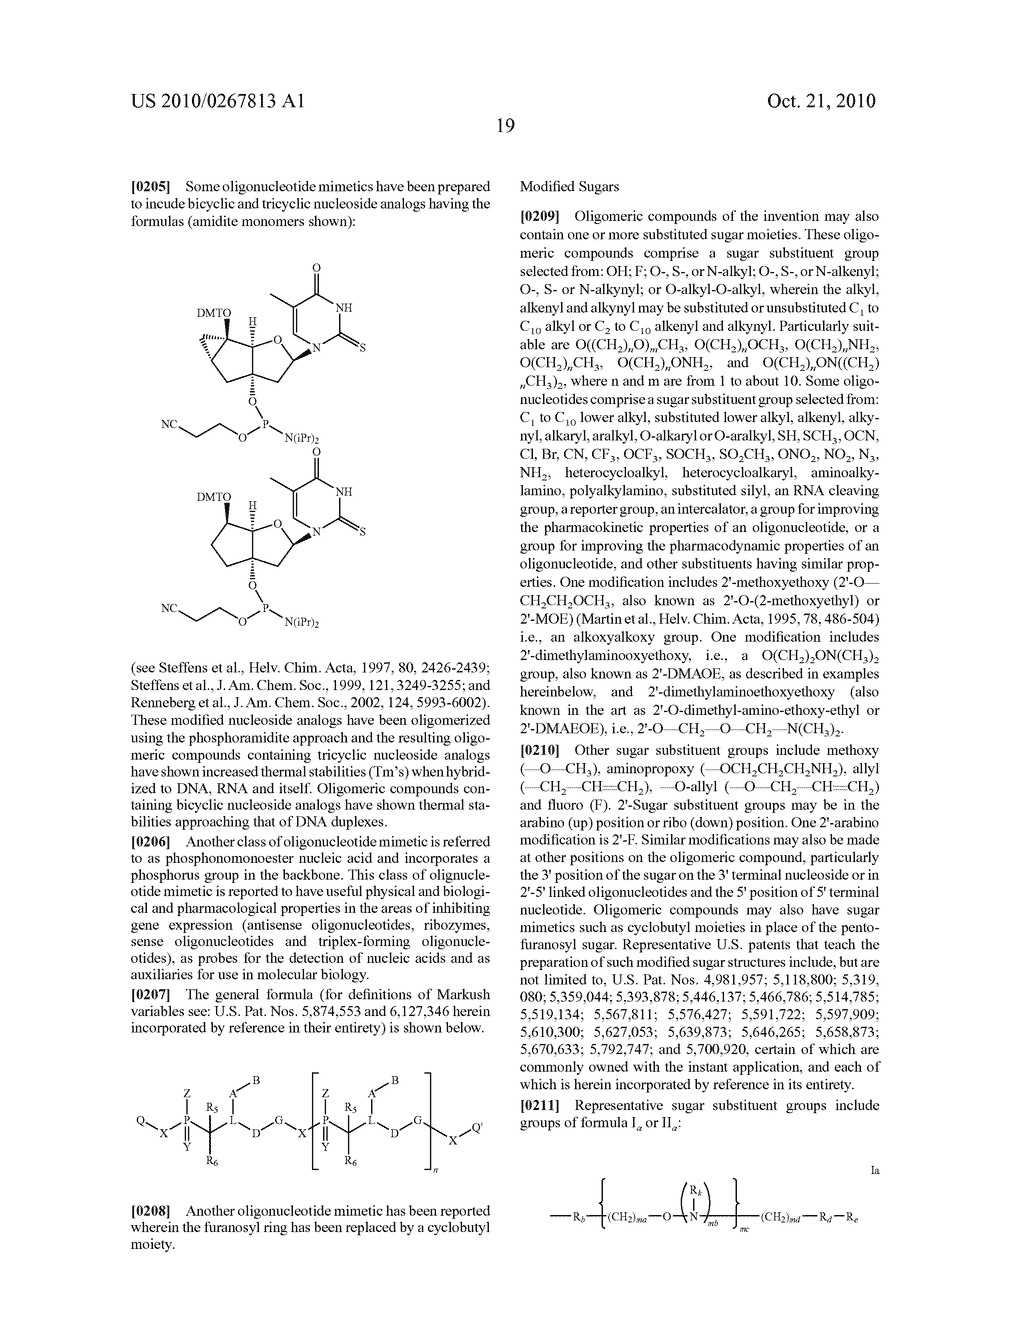 Oligomeric Compounds And Compositions For Use In Modulation Of Small Non-Coding RNAs - diagram, schematic, and image 21